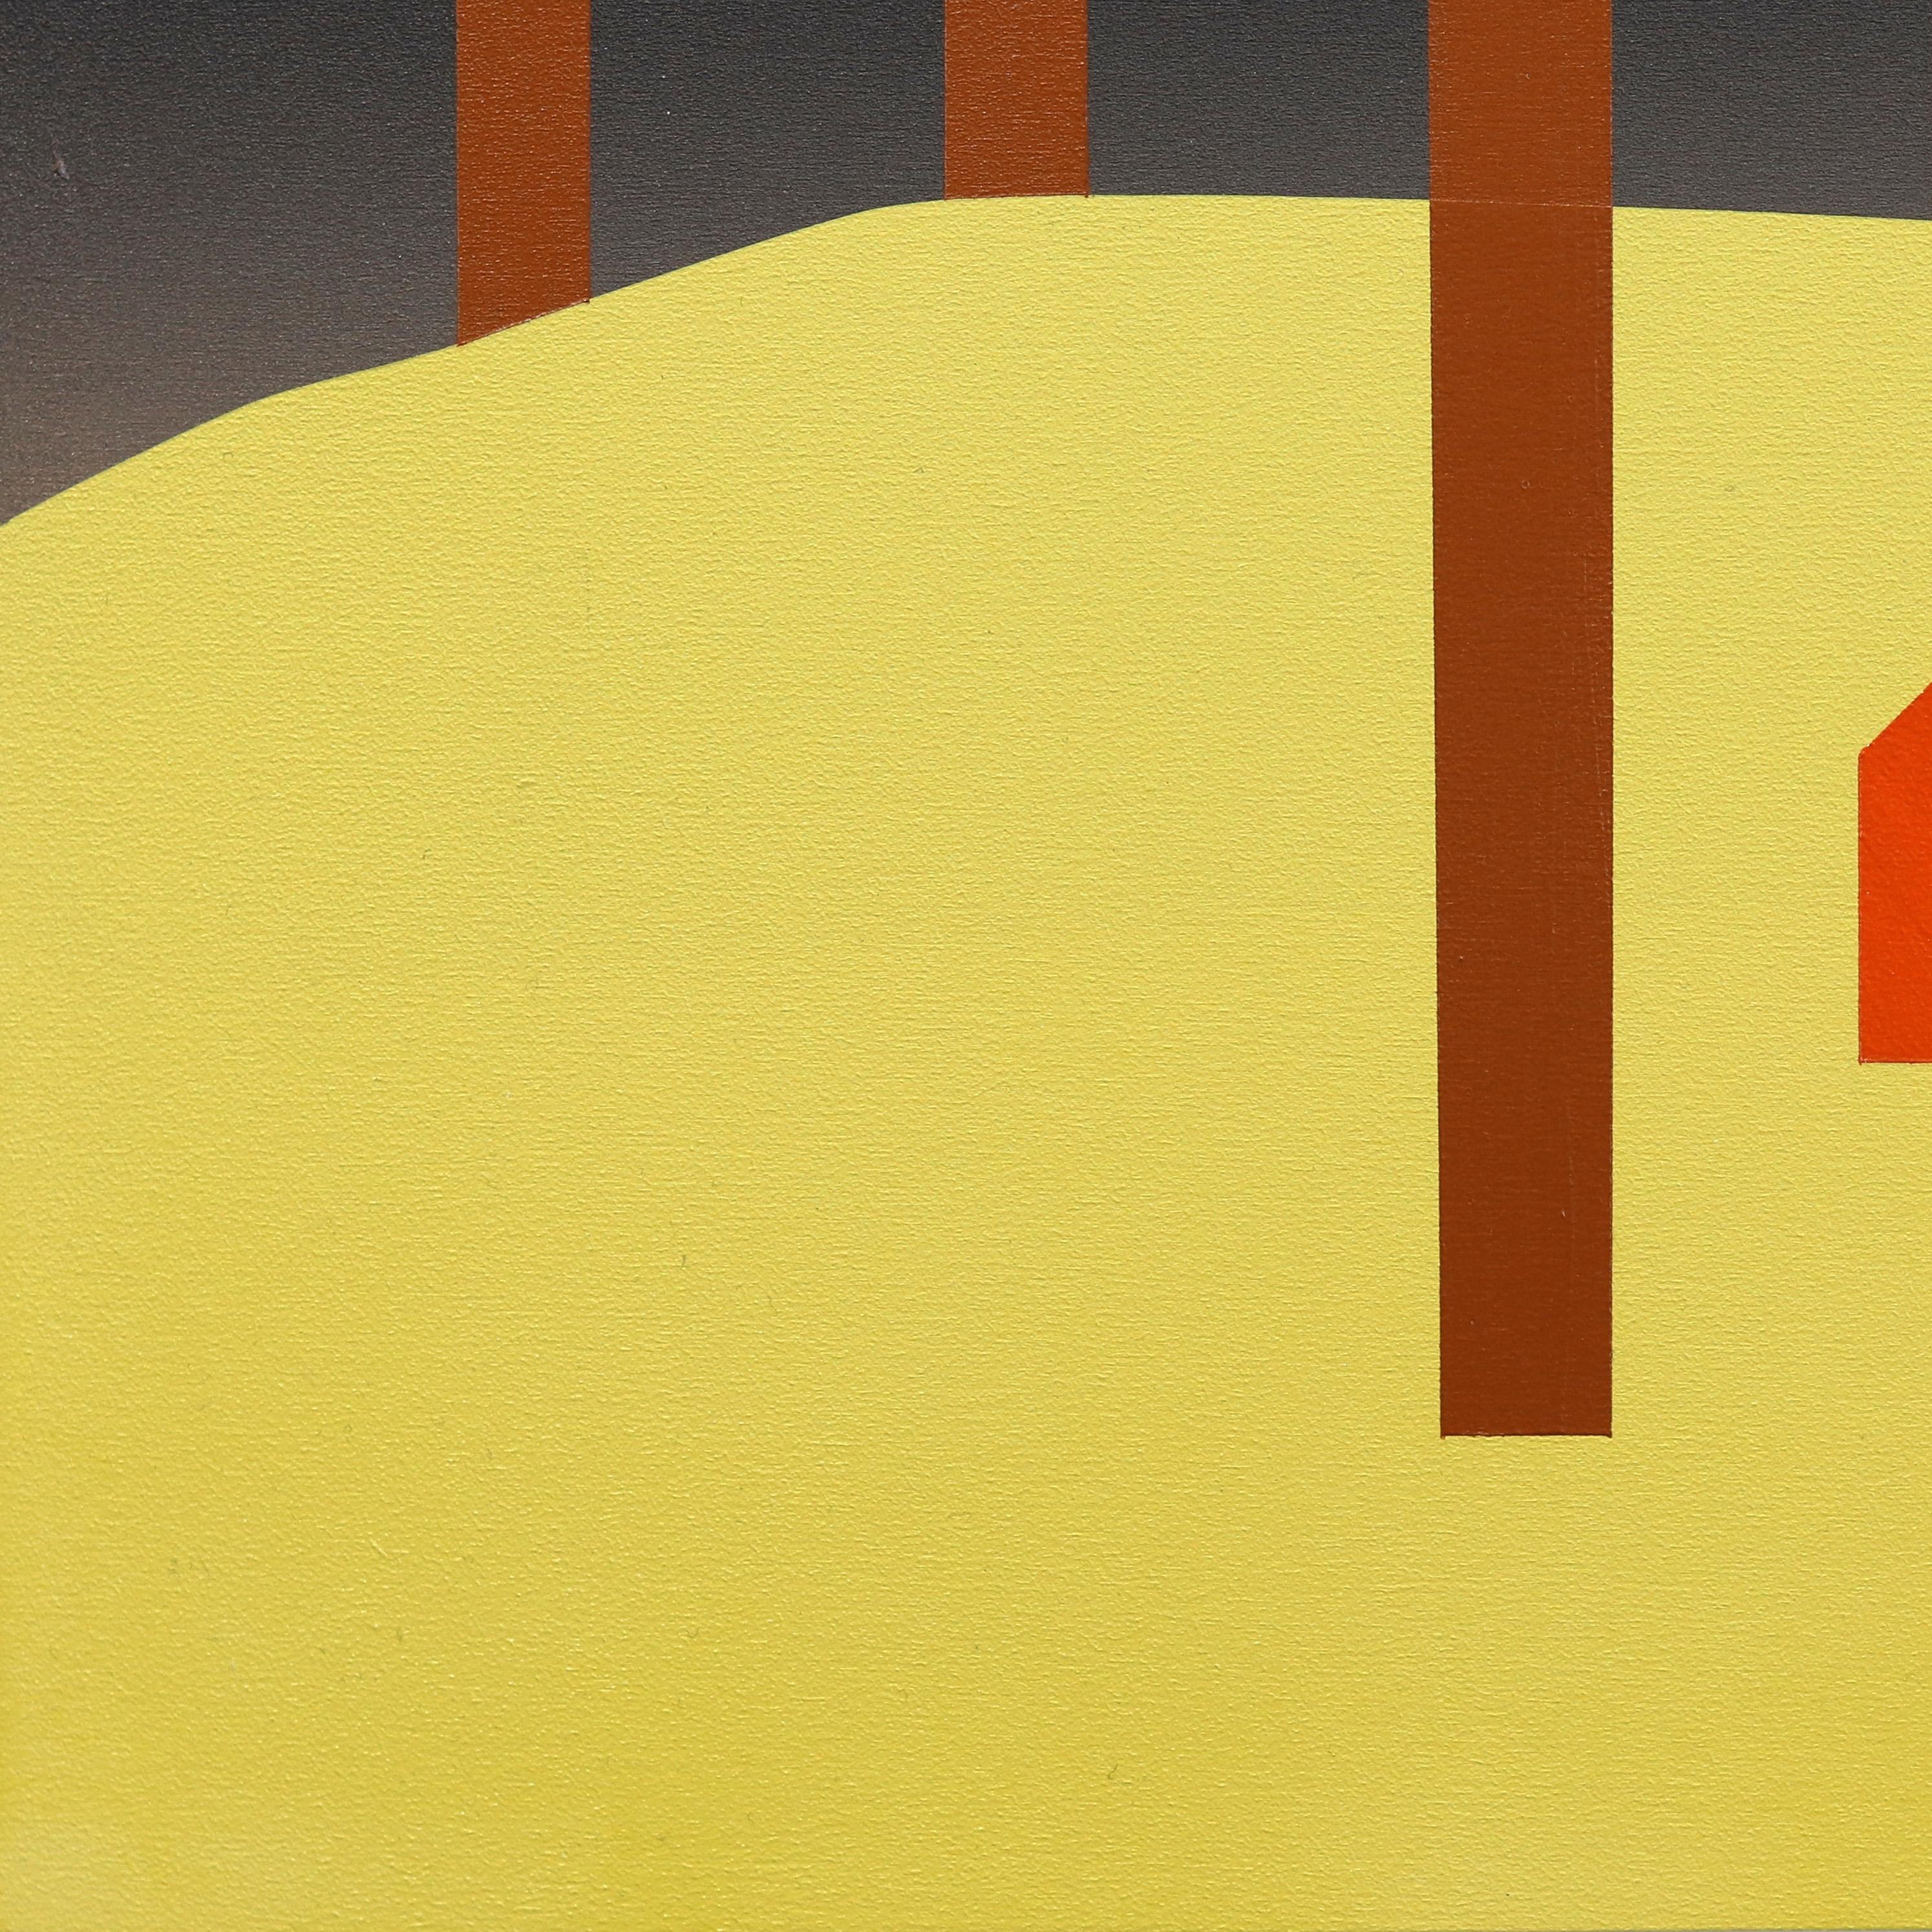 Cabin in September  -  Minimalist Figurative Landscape Painting  For Sale 4